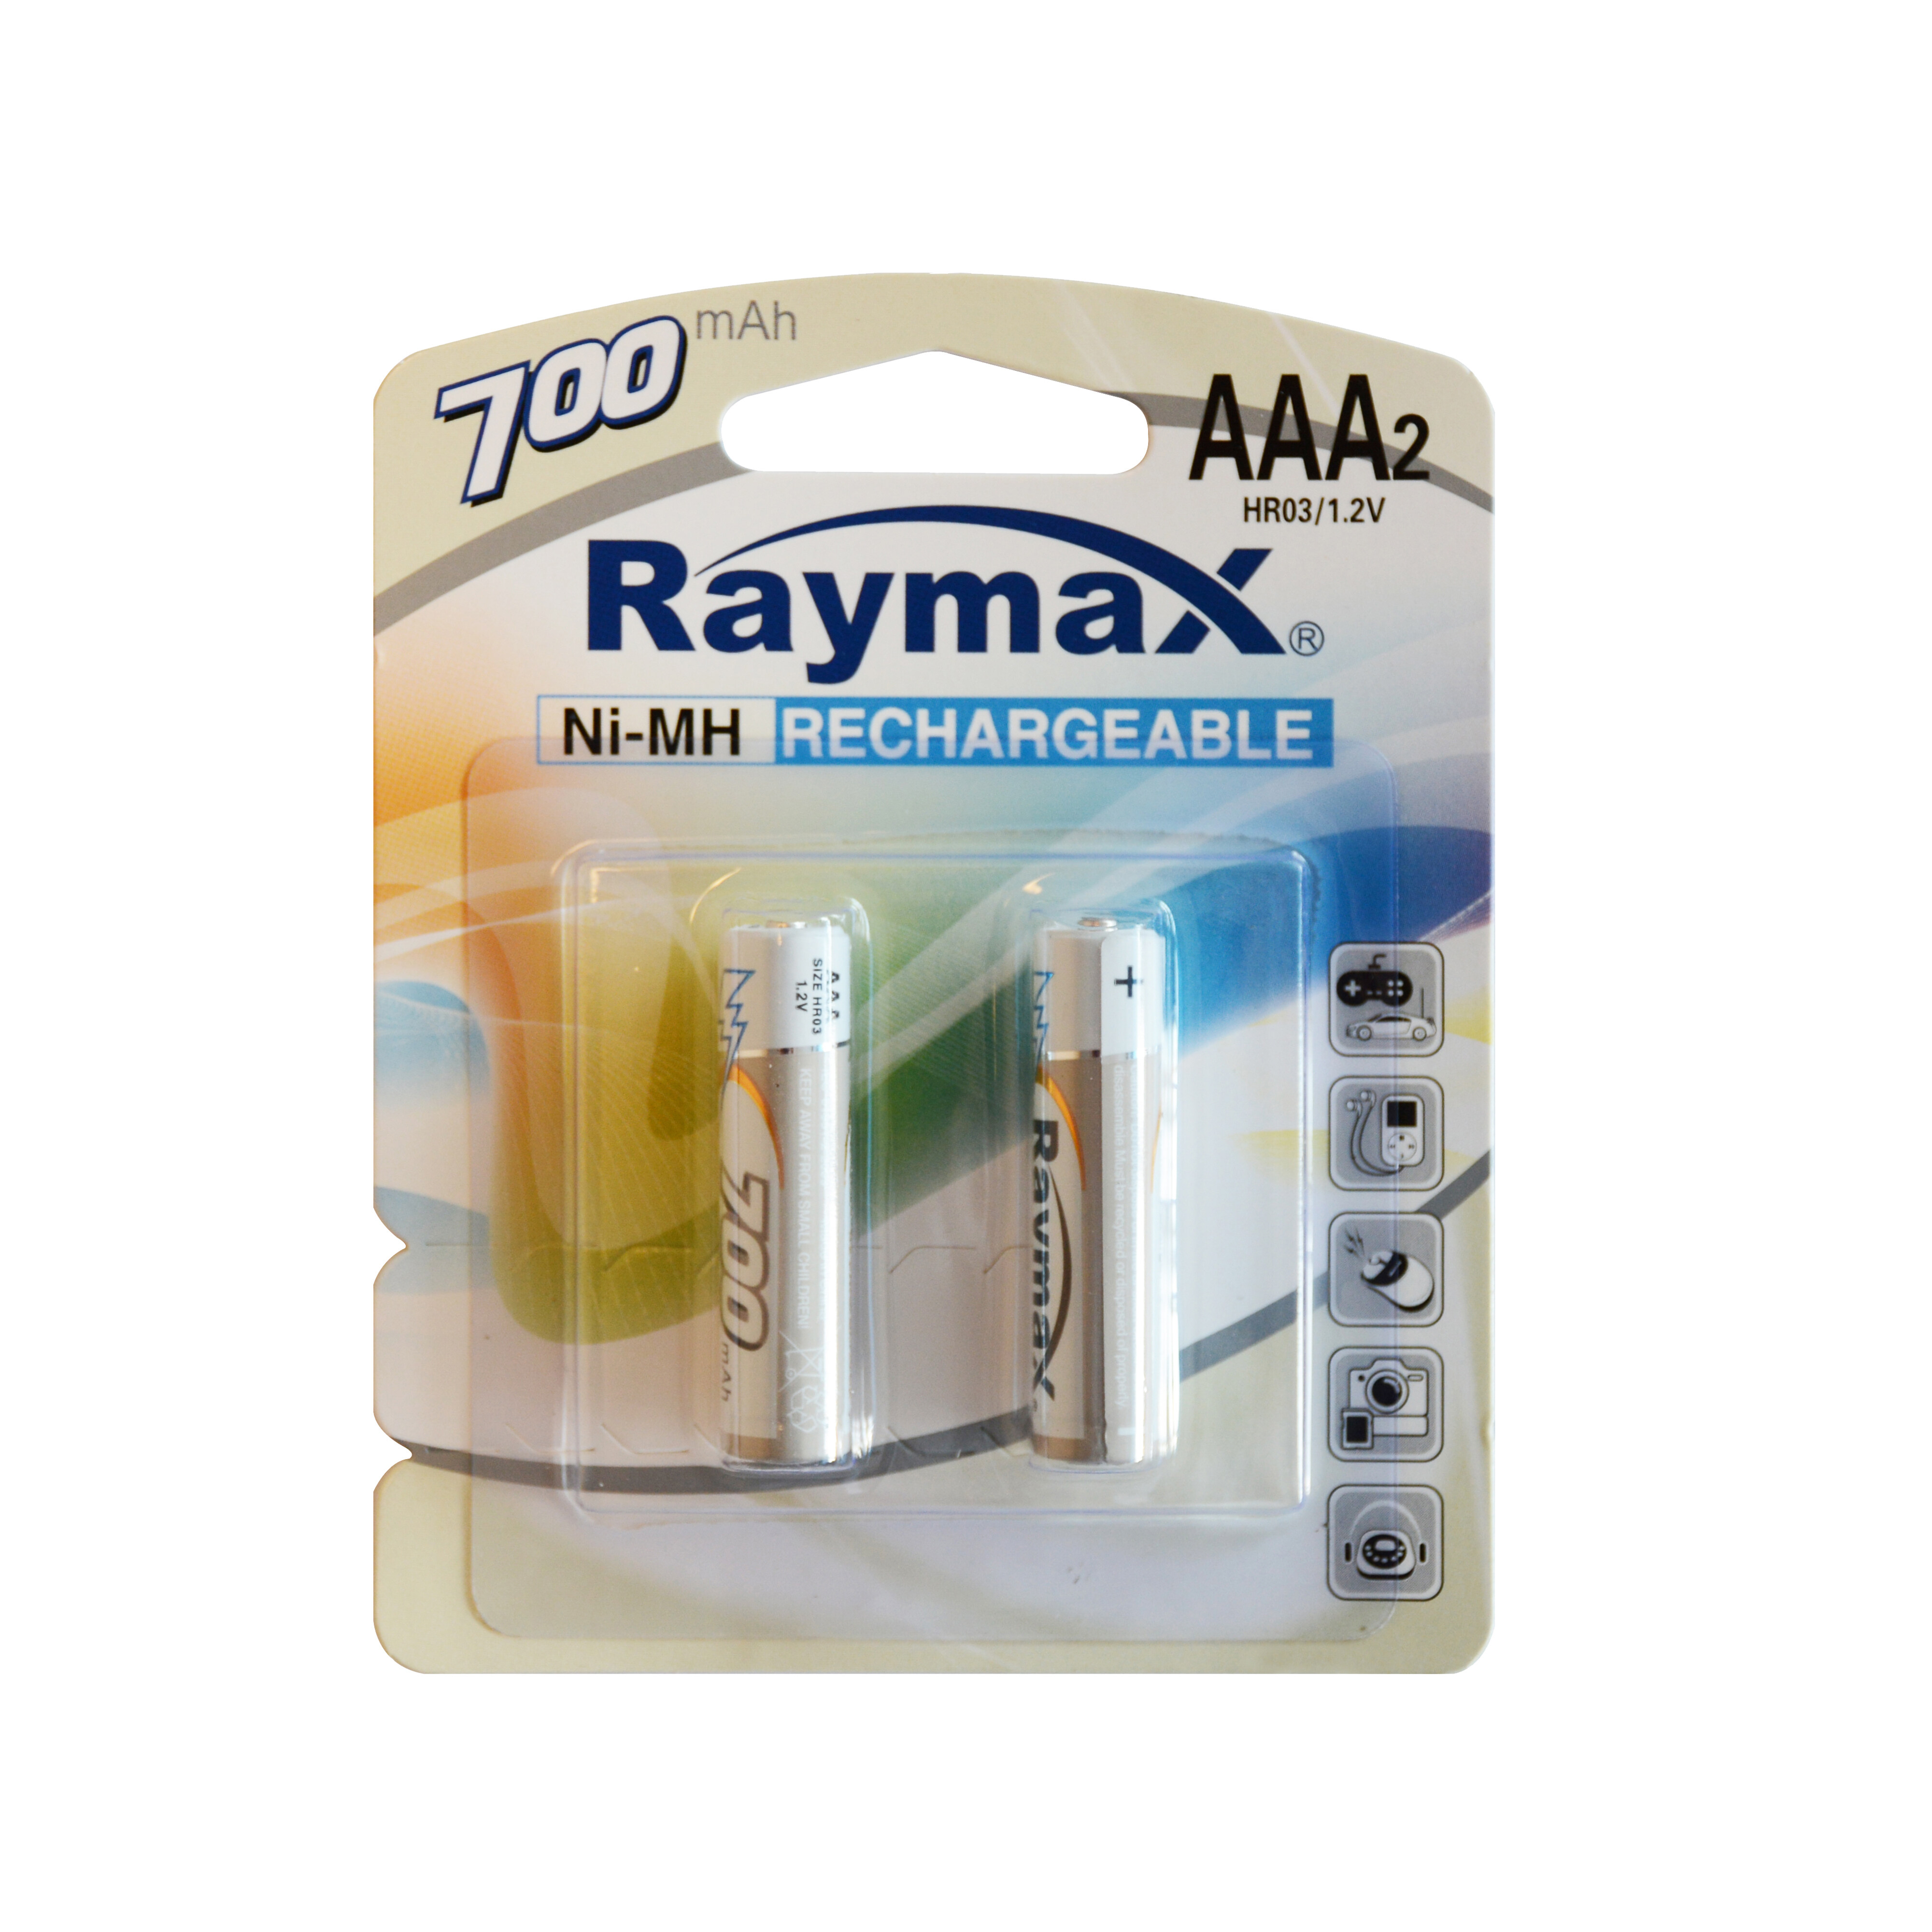 Raymax High Capacity NIMH rechargeable HR03 AAA 700mAh 1.2V battery for Clocks